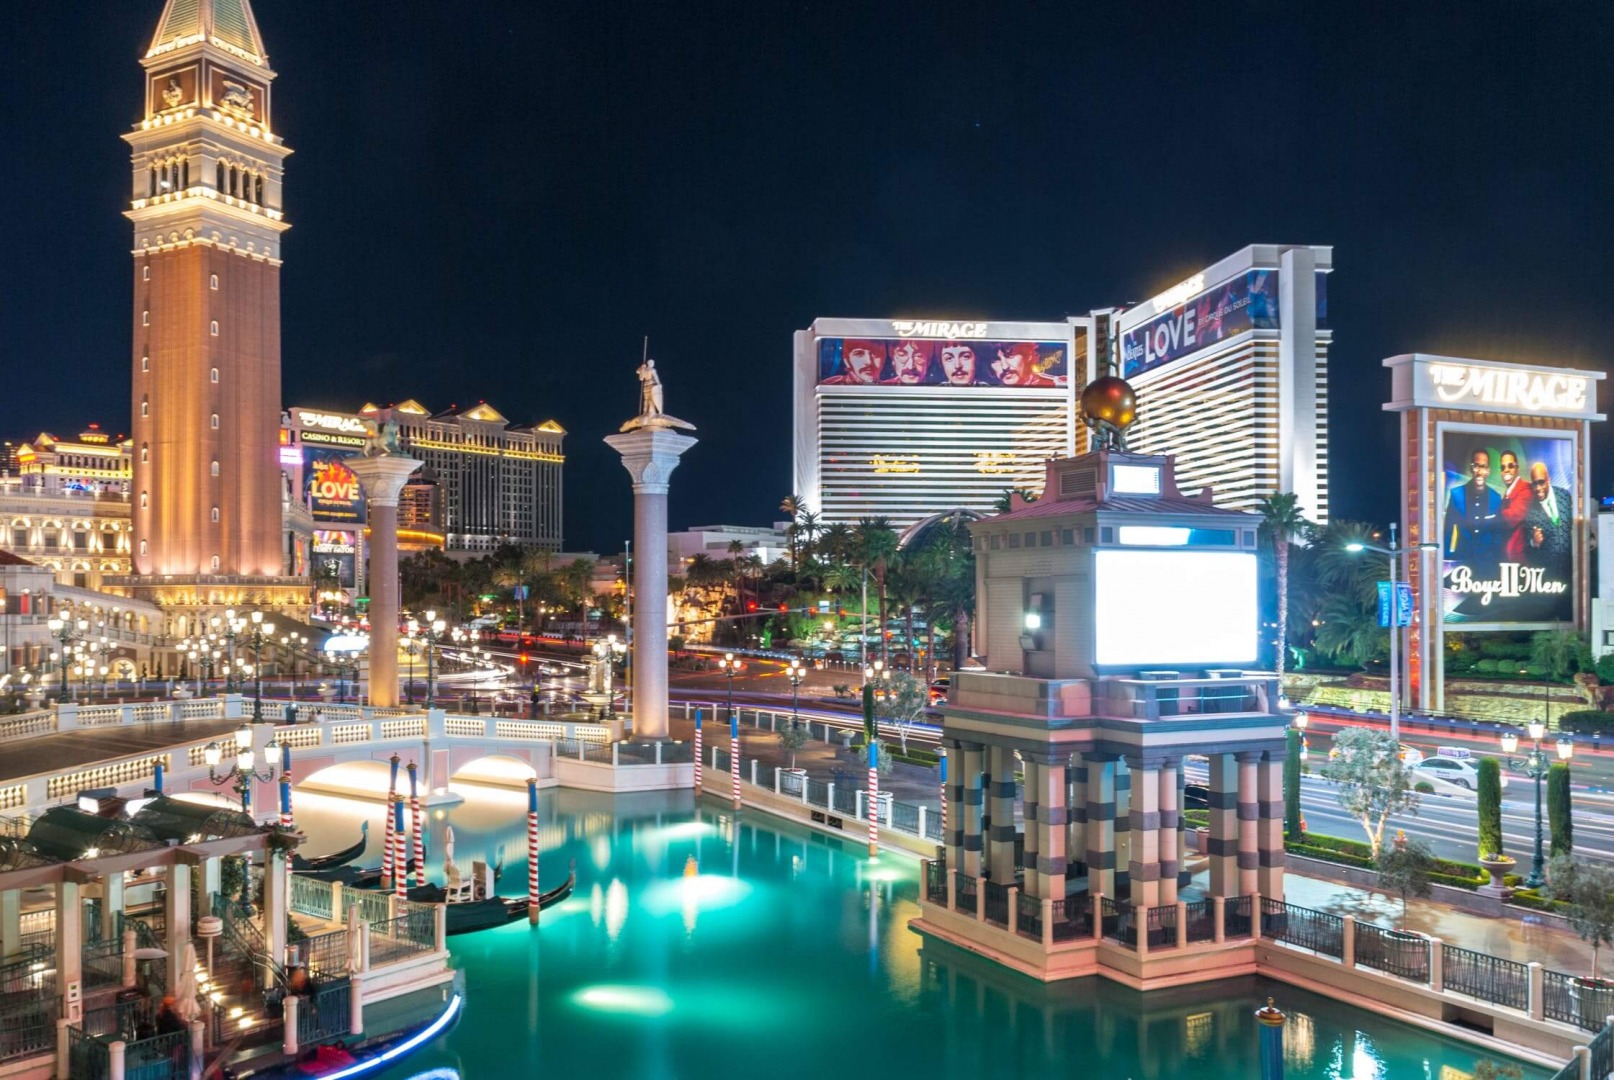 HIMSS 2021: Day 2 - Live From the NL to Las Vegas 